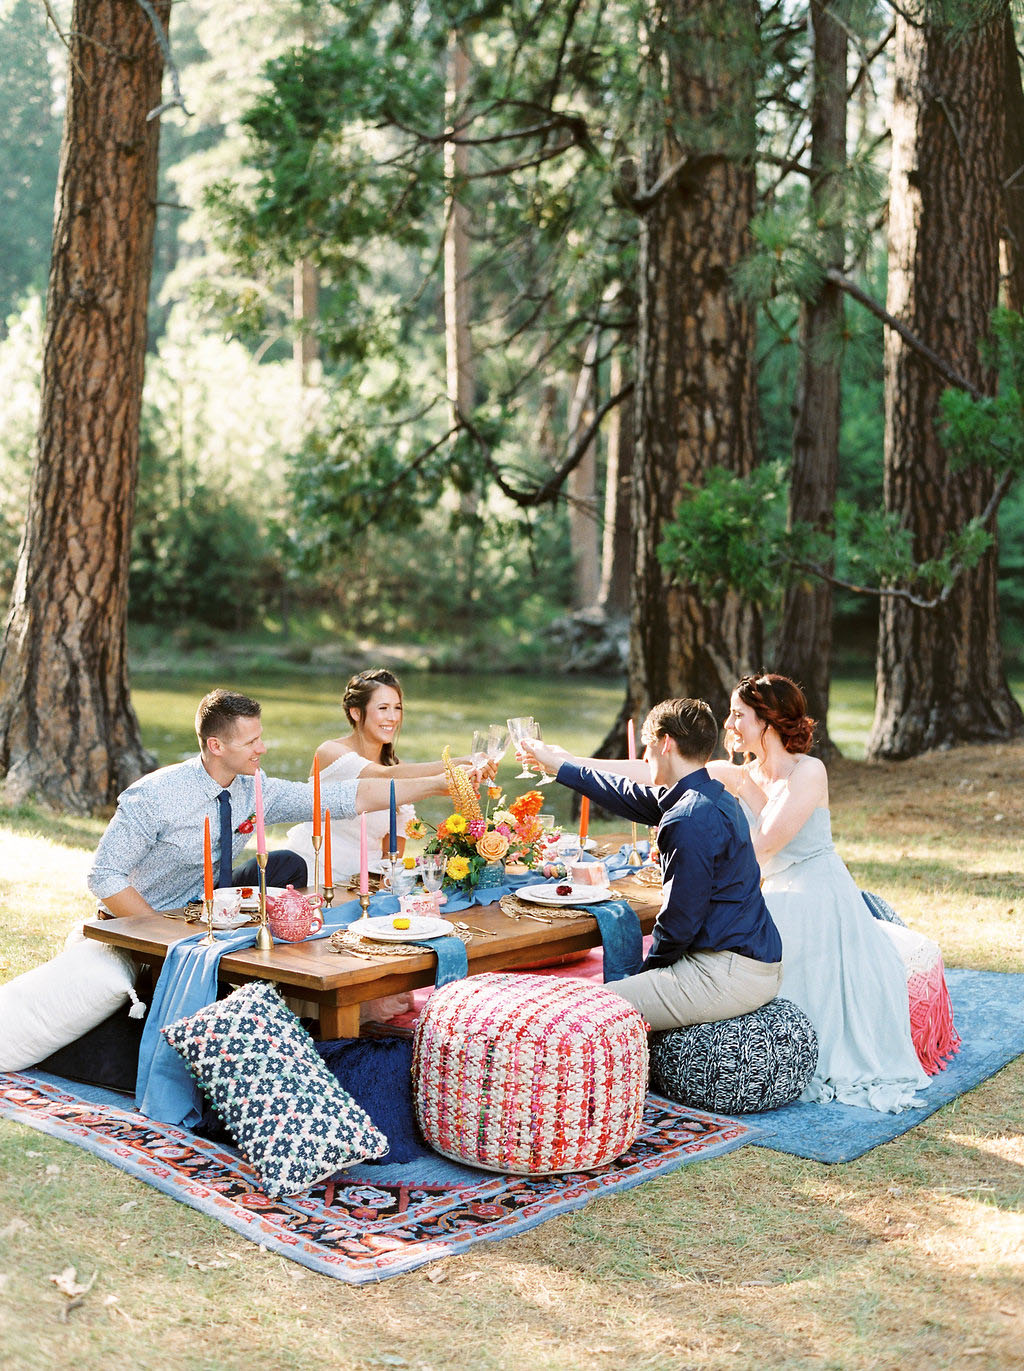 What a perfect outdoor setting for a picnic